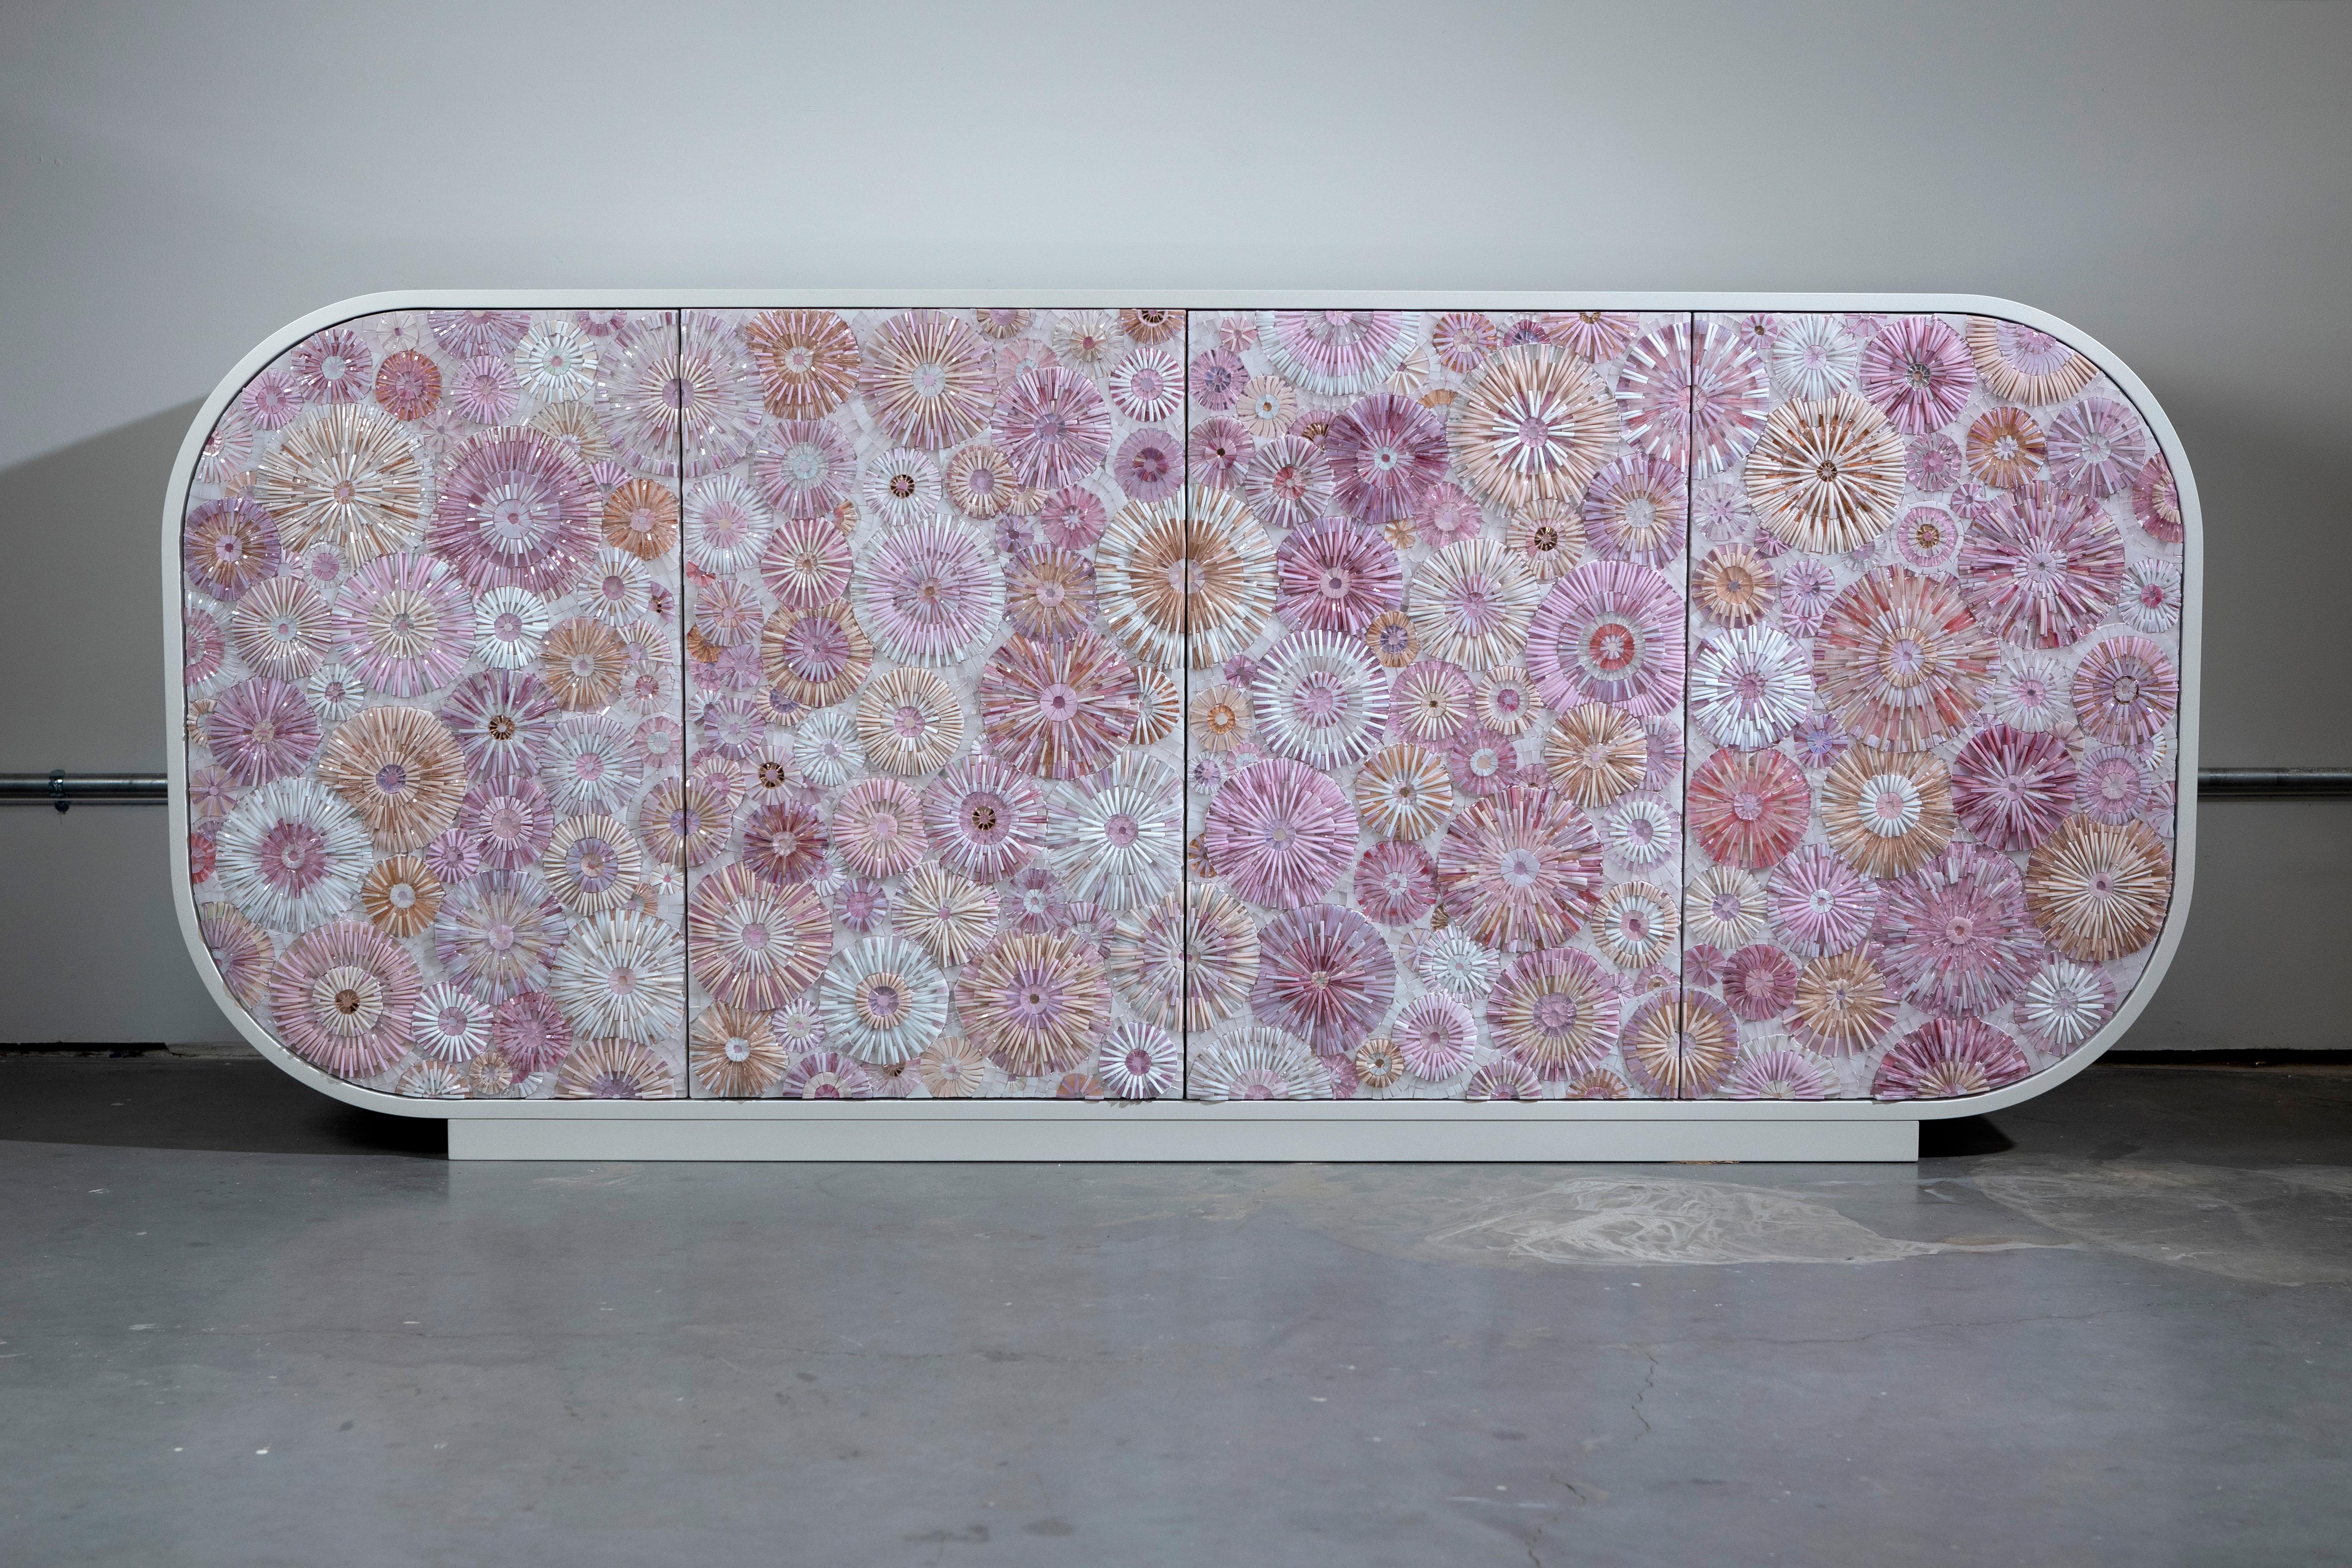 The Mezza Luna Pink Blossom Buffet is one of Ercole Home's latest, and illustrates the evolution of the buffet with its curved edges putting more emphasis on the sleek modern design. The Mezza Luna embodies luxury, and establishes it presence in the